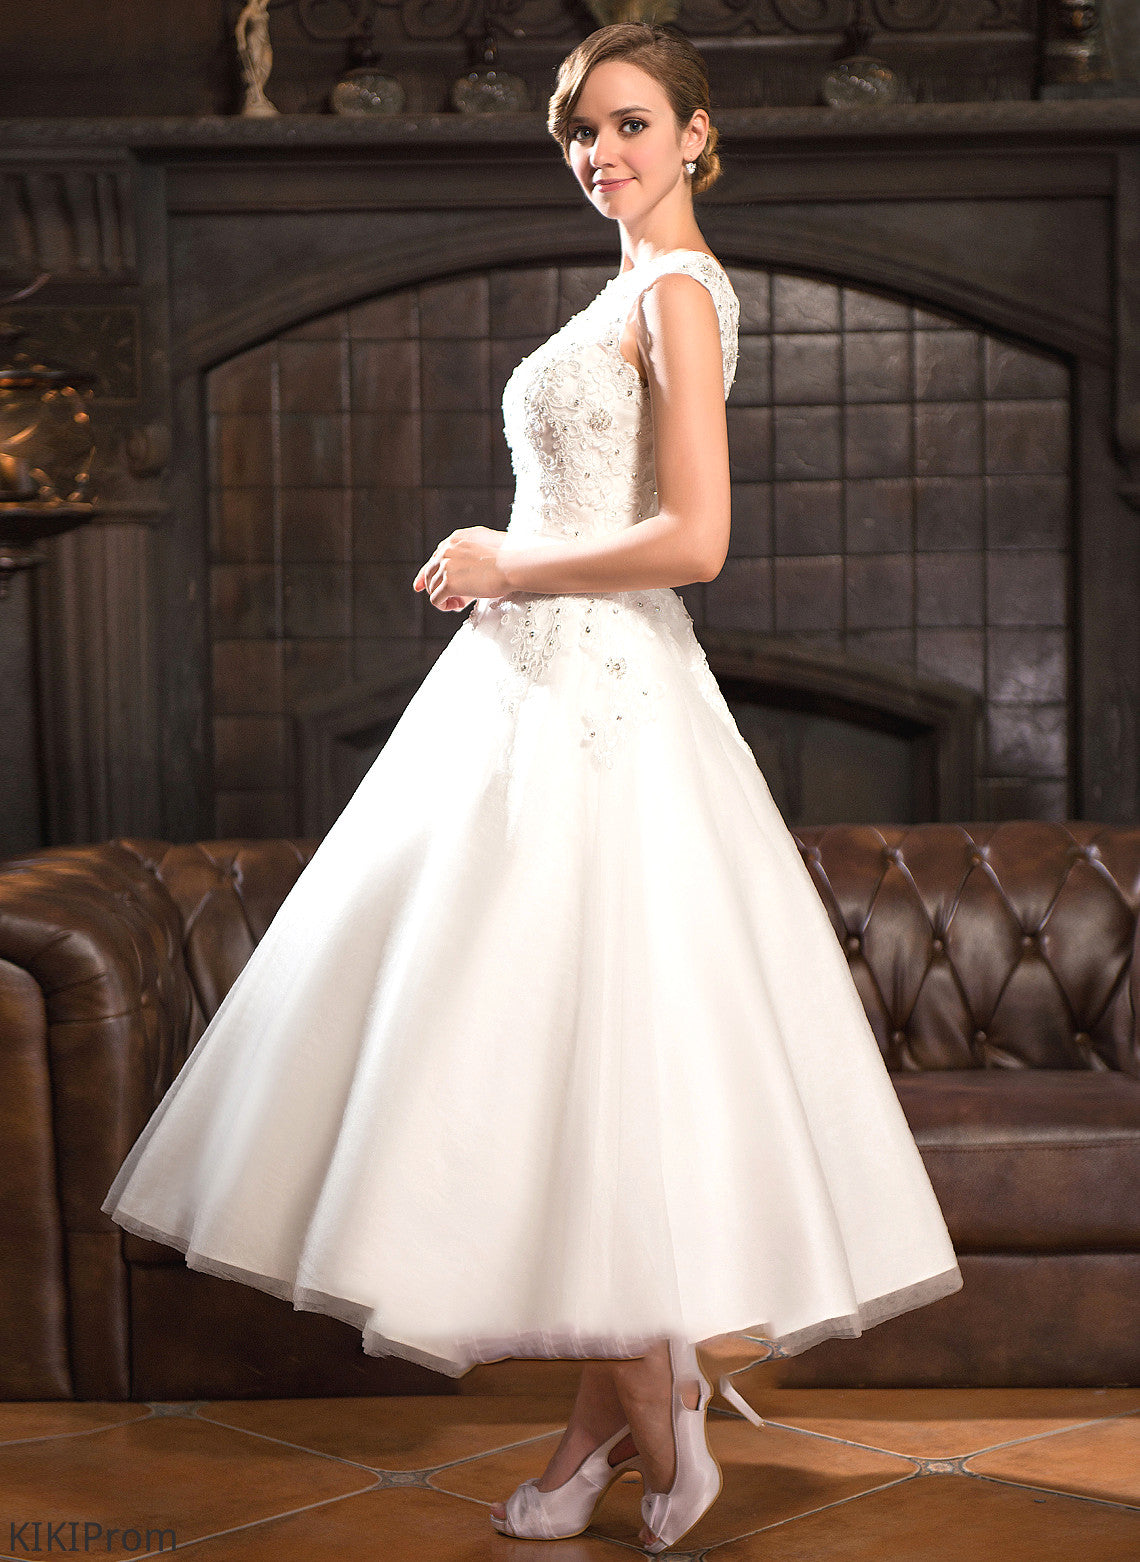 Scoop Ball-Gown/Princess Wedding Dress Tea-Length Lace Sequins Wedding Dresses With Neck Beading Tulle Britney